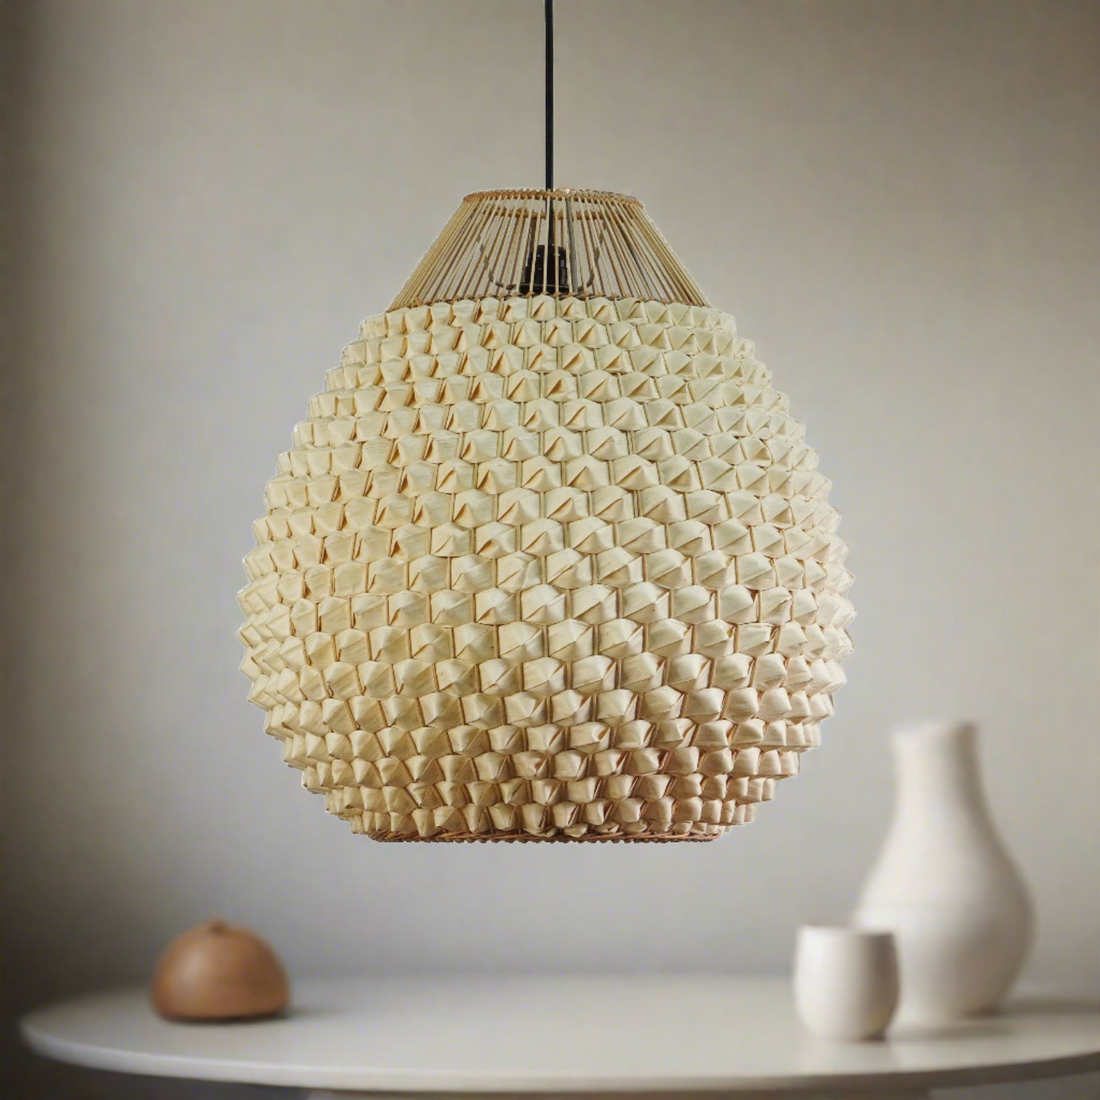 Pineapple Shaped Palm Leaves Lampshade, Handcrafted Pendant Lamps, Hanging Ceiling Lights